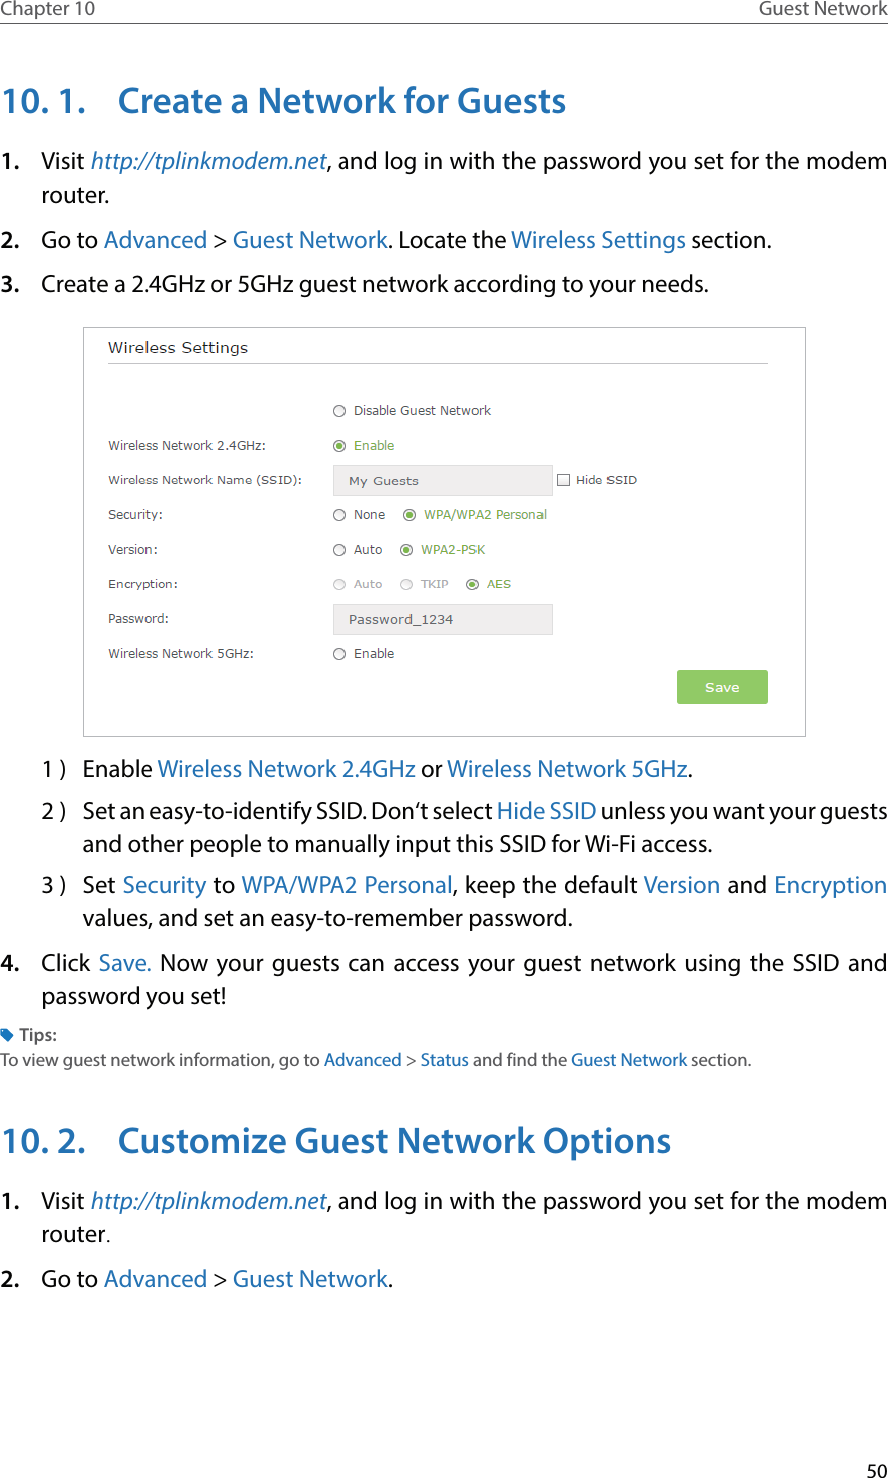 50Chapter 10 Guest Network10. 1.  Create a Network for Guests1.  Visit http://tplinkmodem.net, and log in with the password you set for the modem router.2.  Go to Advanced &gt; Guest Network. Locate the Wireless Settings section.3.  Create a 2.4GHz or 5GHz guest network according to your needs.1 )  Enable Wireless Network 2.4GHz or Wireless Network 5GHz.2 )  Set an easy-to-identify SSID. Don‘t select Hide SSID unless you want your guests and other people to manually input this SSID for Wi-Fi access.3 )  Set Security to WPA/WPA2 Personal, keep the default Version and Encryption values, and set an easy-to-remember password. 4.  Click Save. Now your guests can access your guest network using the SSID and password you set!Tips:To view guest network information, go to Advanced &gt; Status and find the Guest Network section.10. 2.  Customize Guest Network Options1.  Visit http://tplinkmodem.net, and log in with the password you set for the modem router.2.  Go to Advanced &gt; Guest Network.